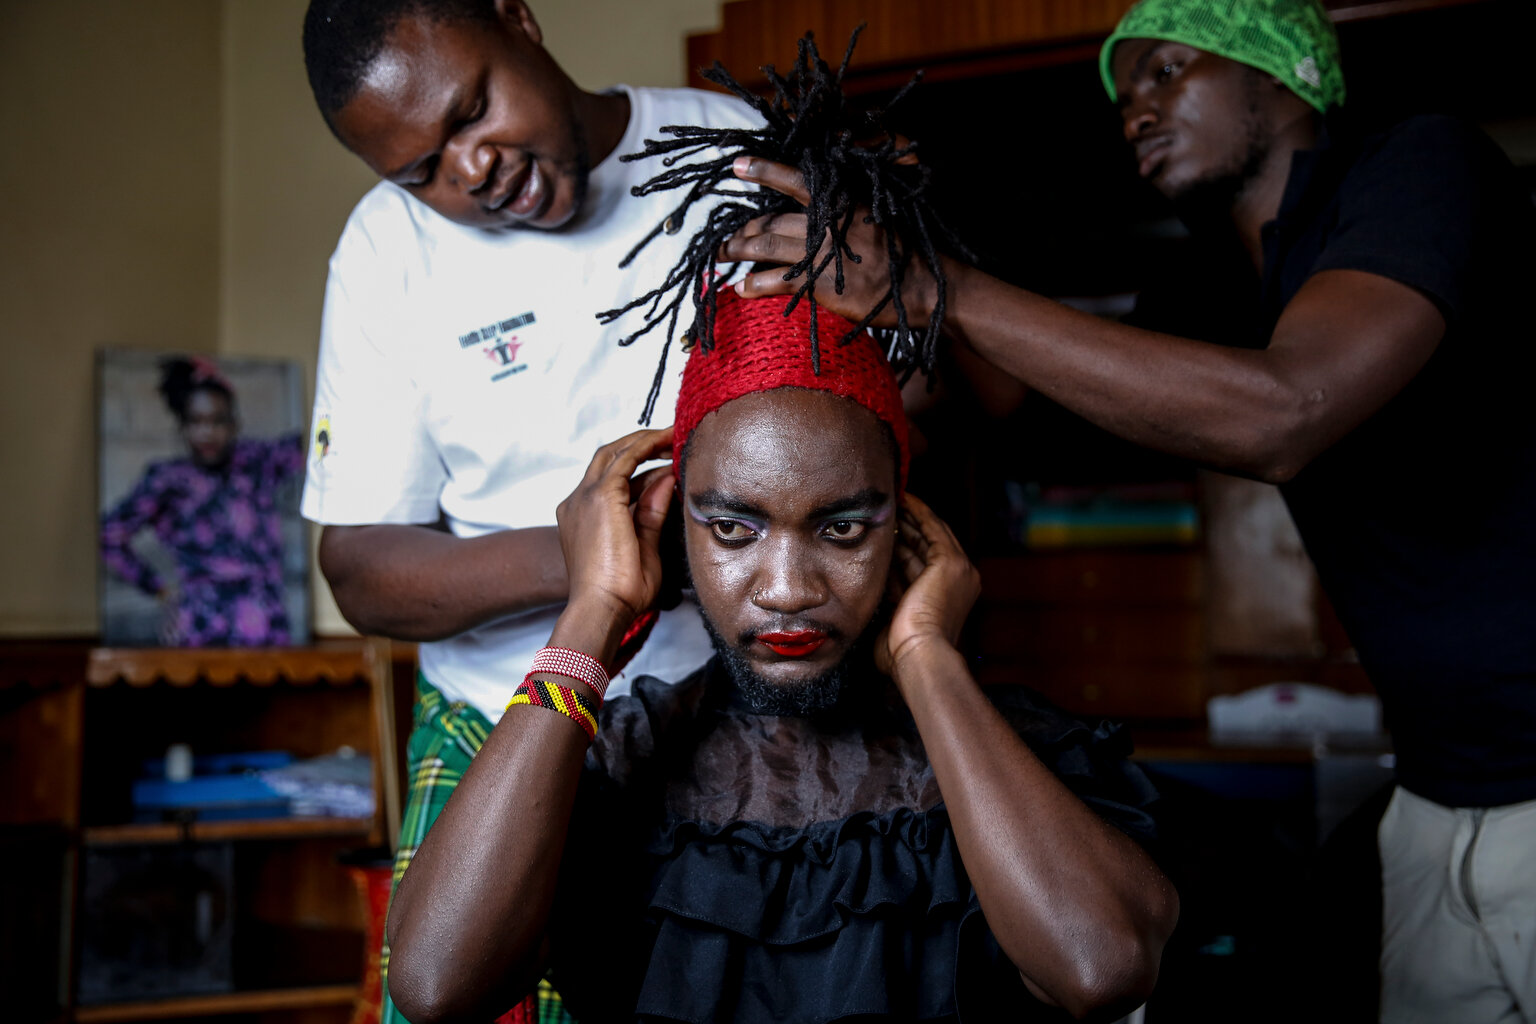  Raymond Brian, center, a Ugandan refugee and a nonconforming gender person who also goes by the name of "Mother Nature" has his make-up done by fellow Ugandan refugees Kasaali Brian, left, and Chris Wasswa, right, at a house that serves as a shelter